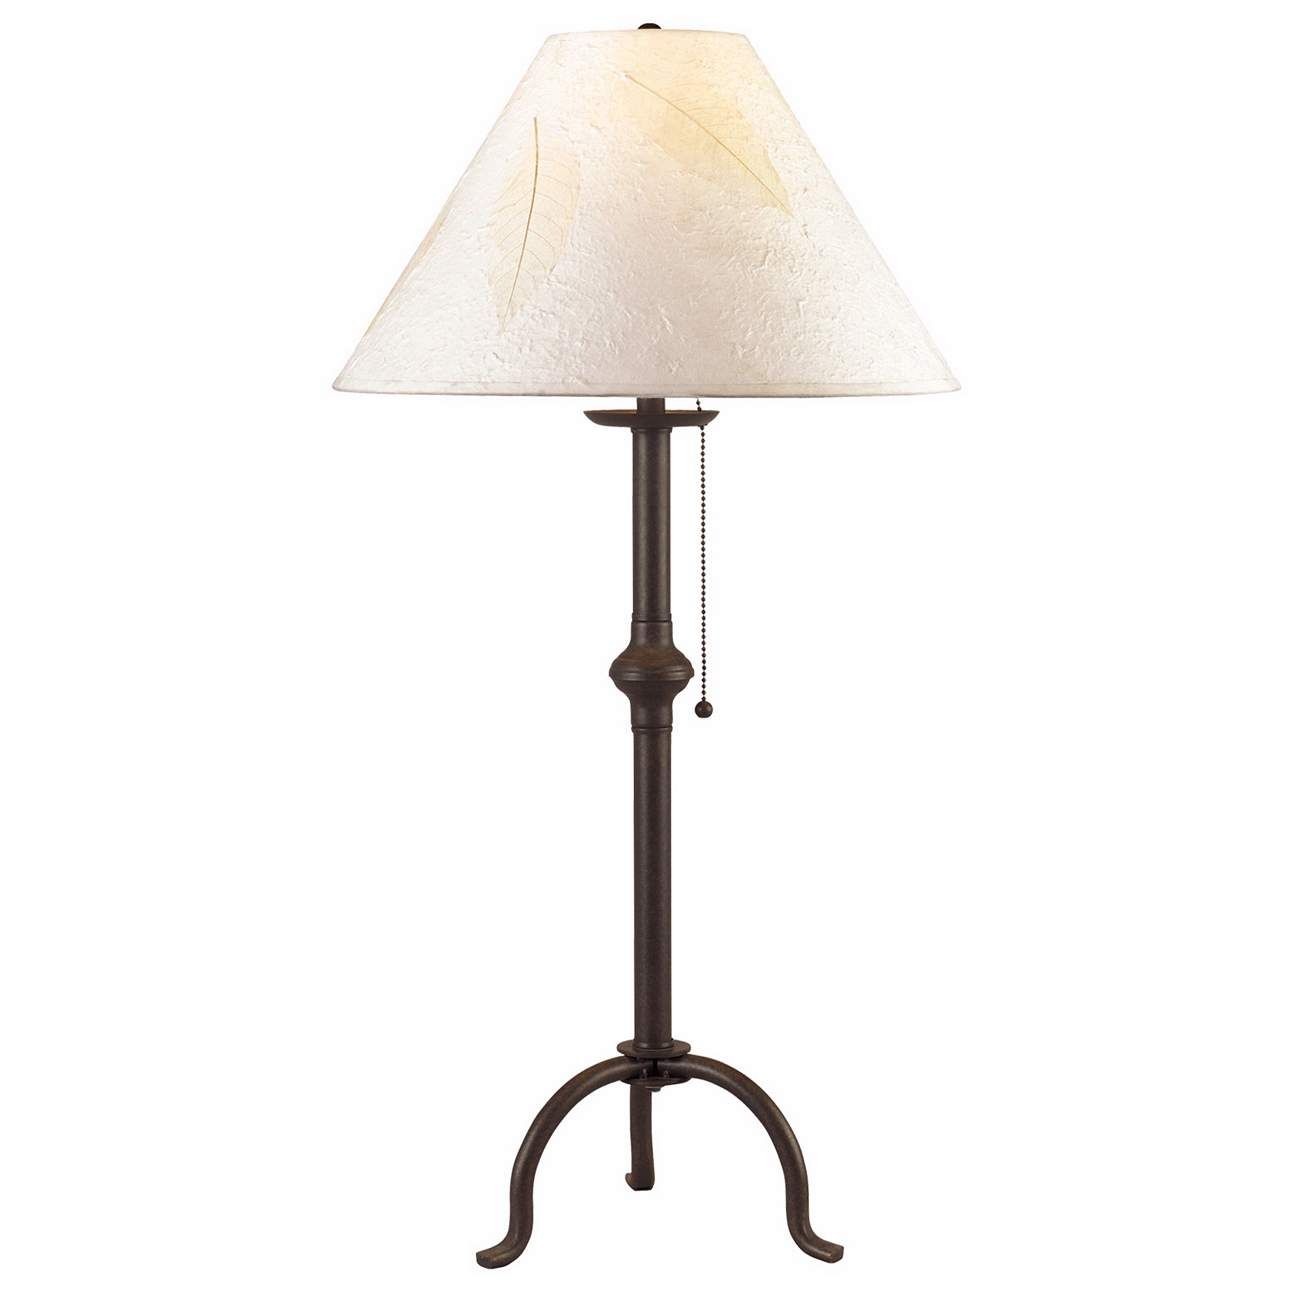 Craftsman Collection Pennyfoot Wrought Iron Table Lamp - #74947 | Lamps Plus | Lamps Plus